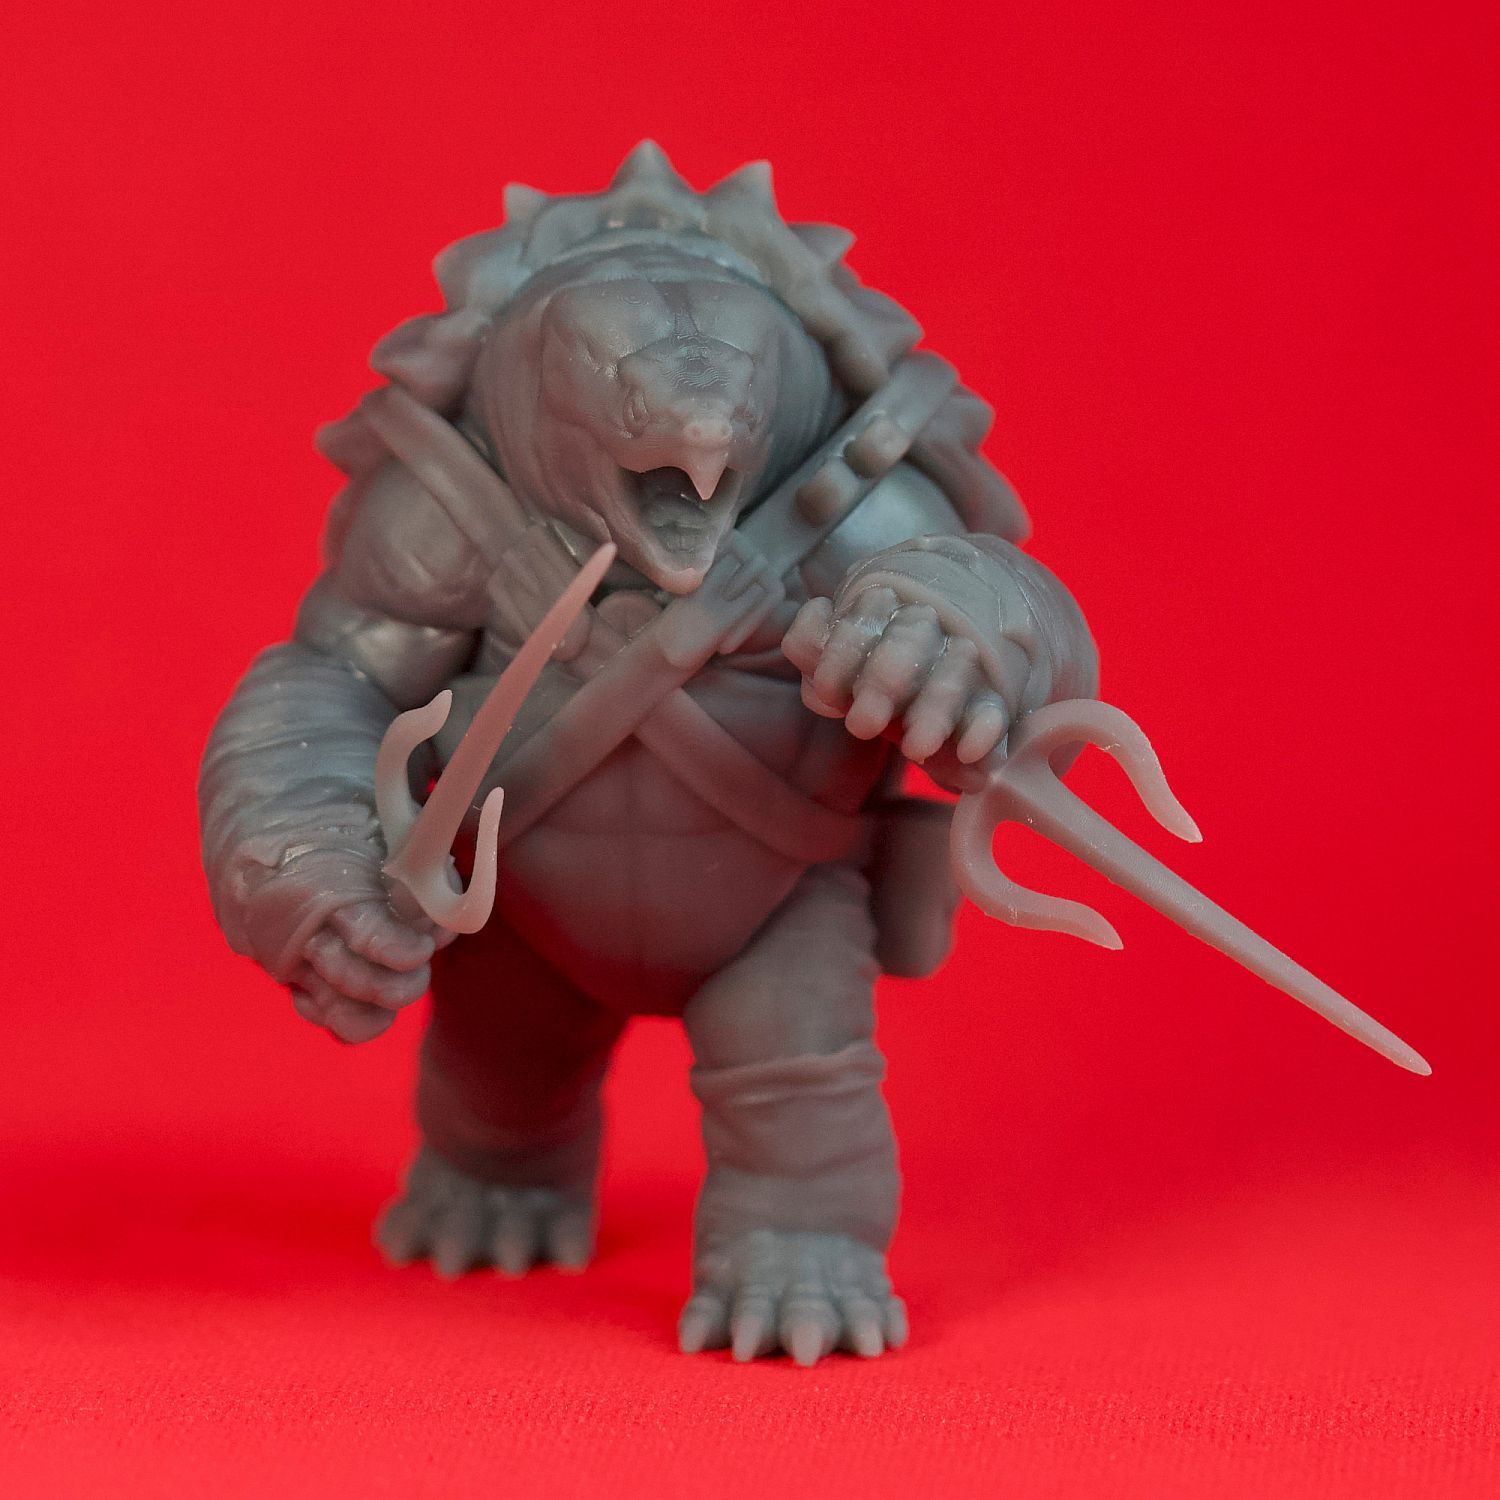 3D Printable Dual Sai Tortle - Tabletop Miniatures (Pre-Supported